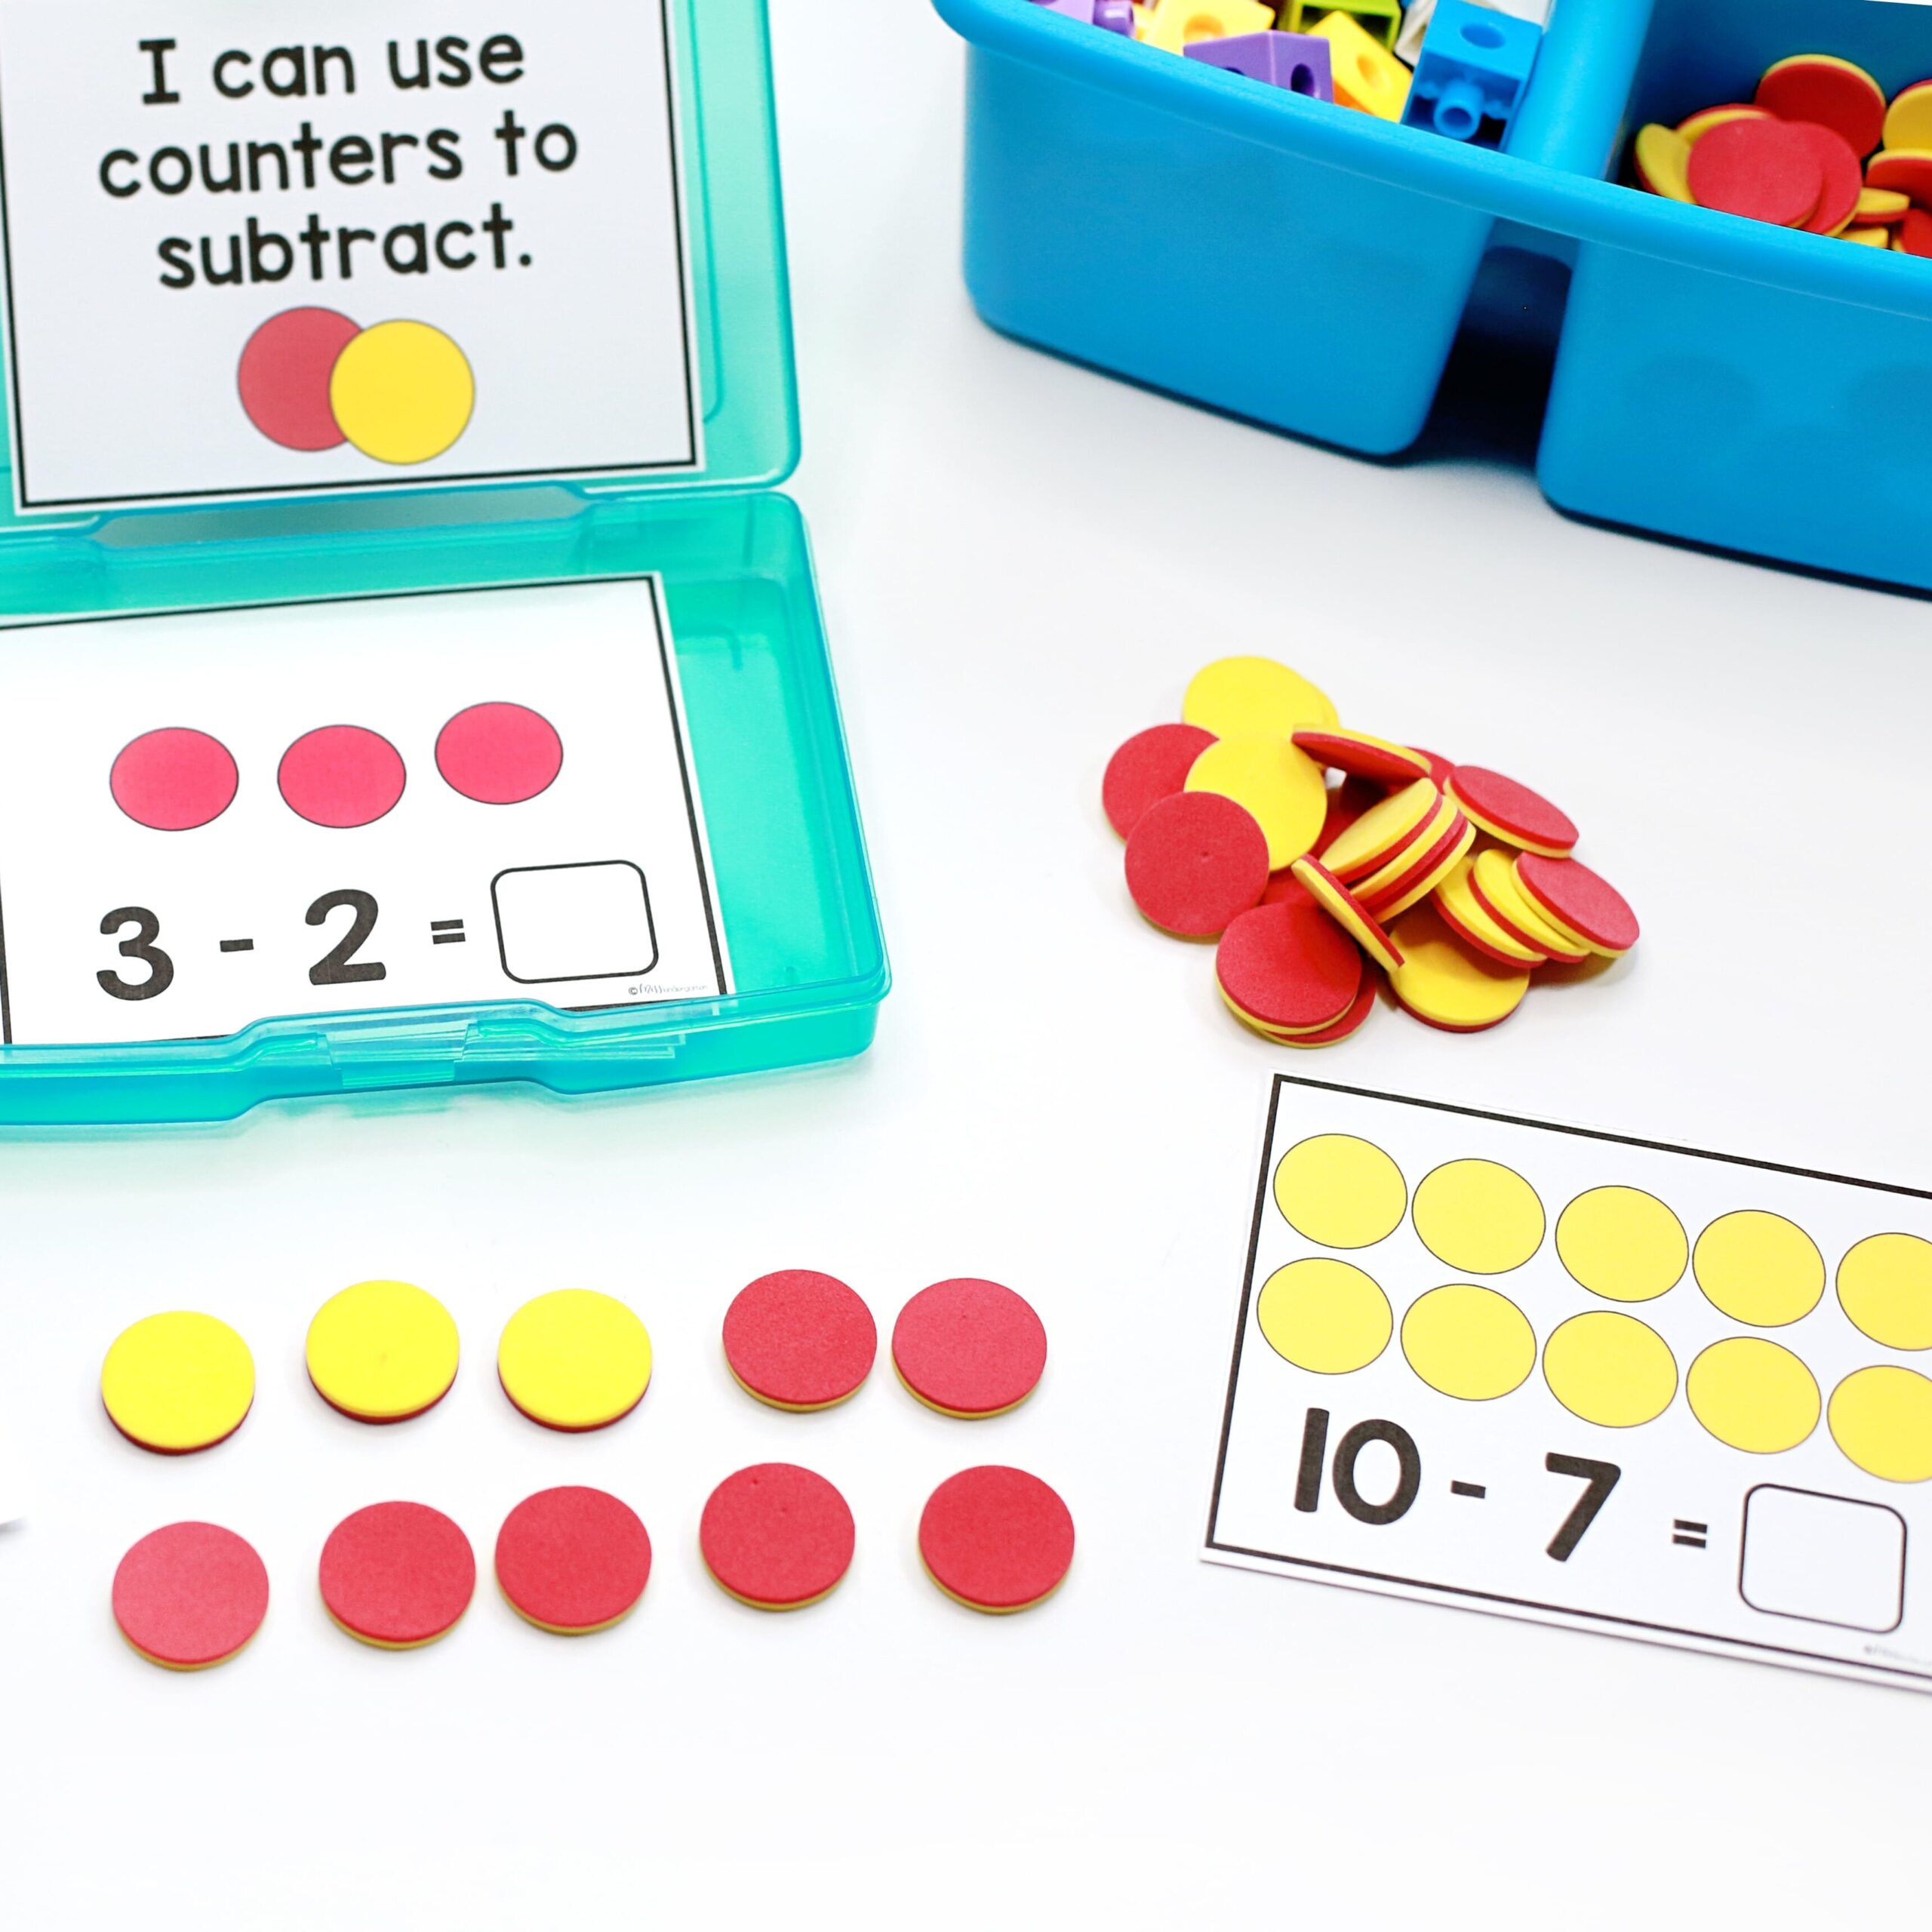 A white desk top with a container of subtraction task cards, one task card in use, and a pile of two-color counters being used to model the subtraction equation.